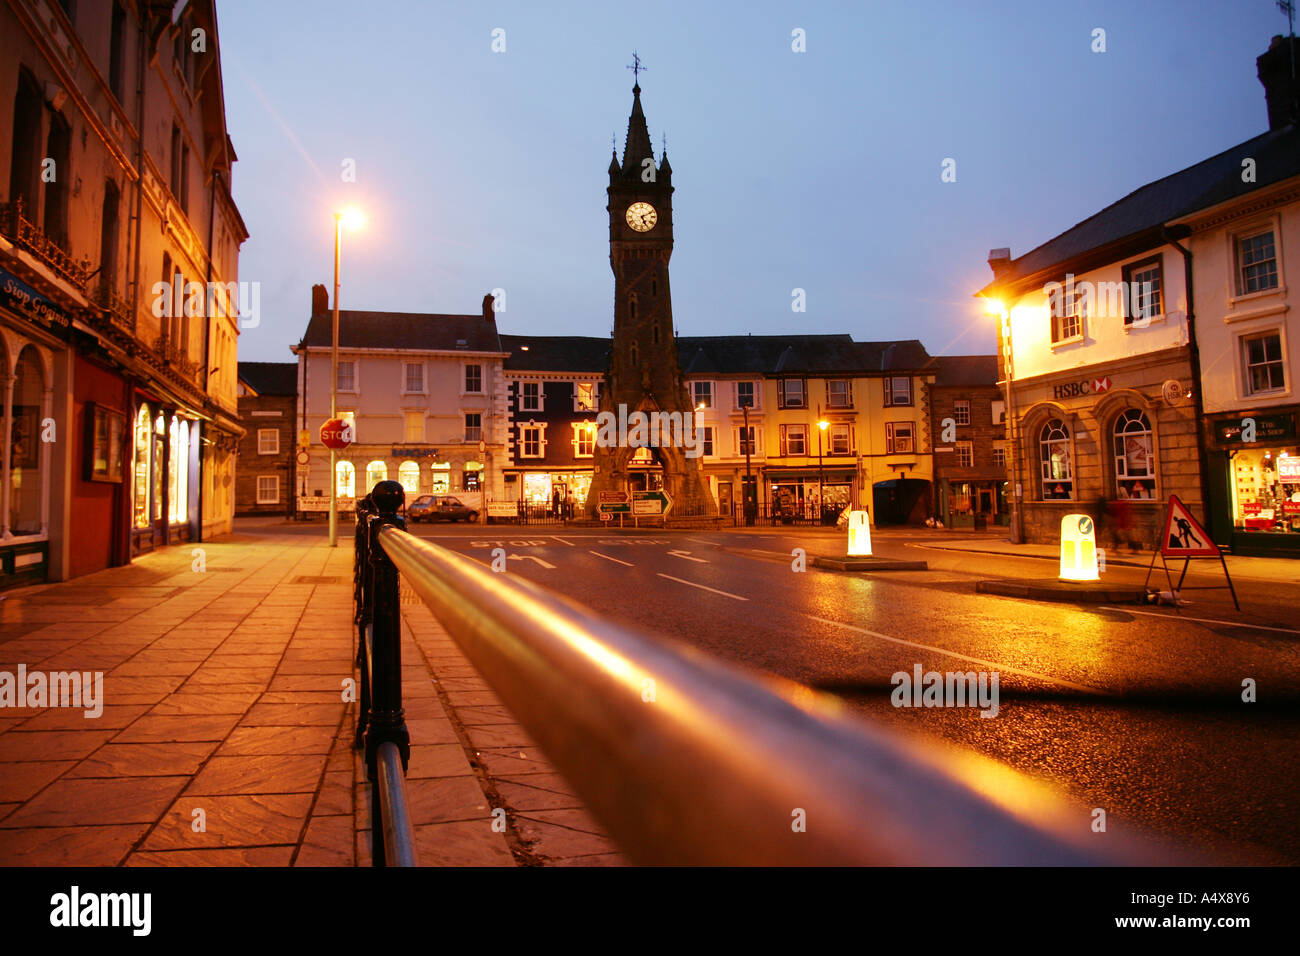 Castlereagh Memorial Clock Tower in Machynlleth, Powys, Wales Stockfoto